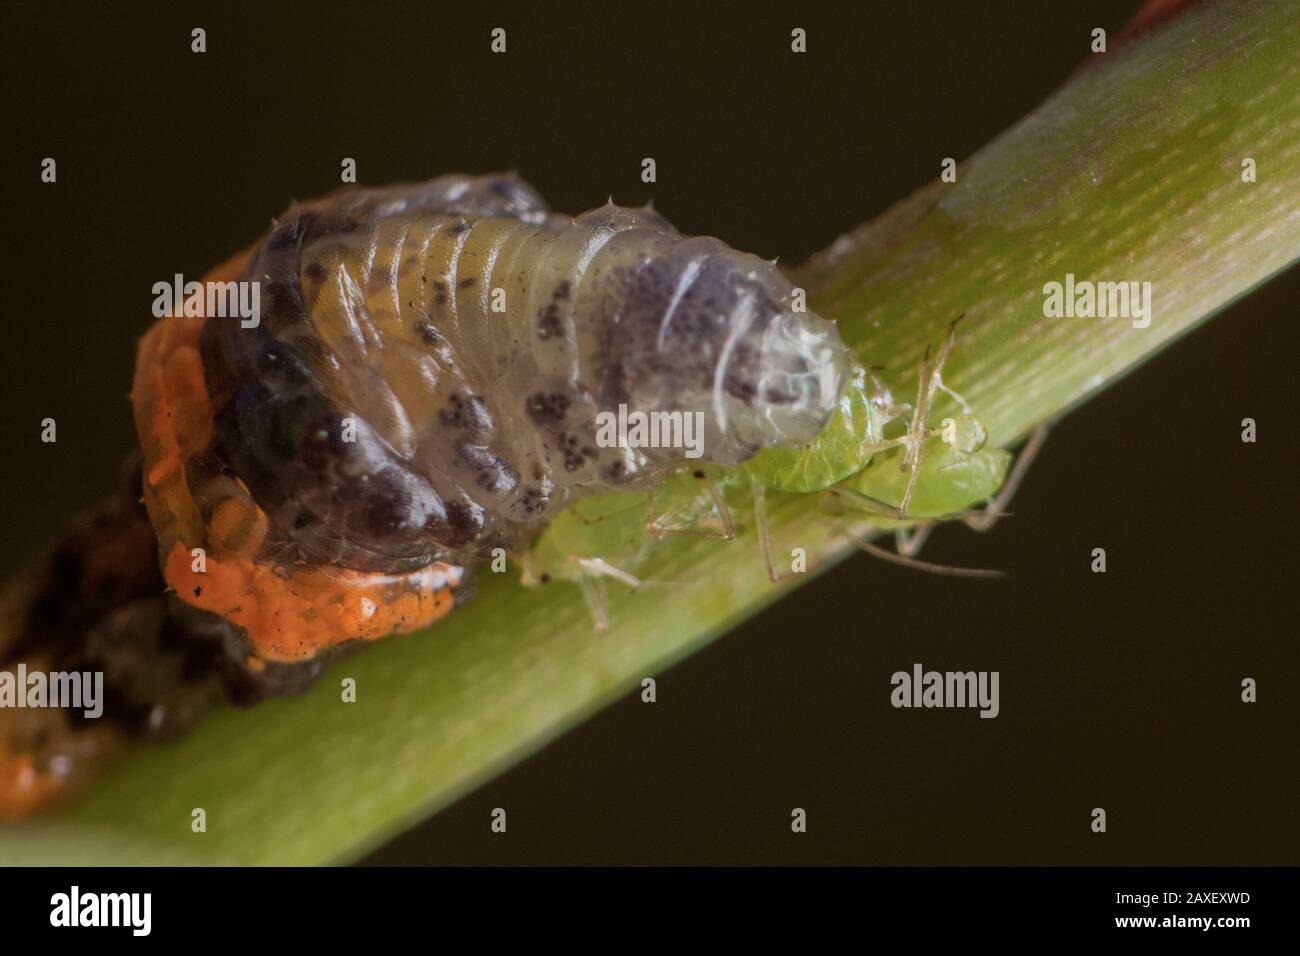 Larva of a hover fly eating an aphid, a syrphidae that can used as insect pest control in gardens Stock Photo